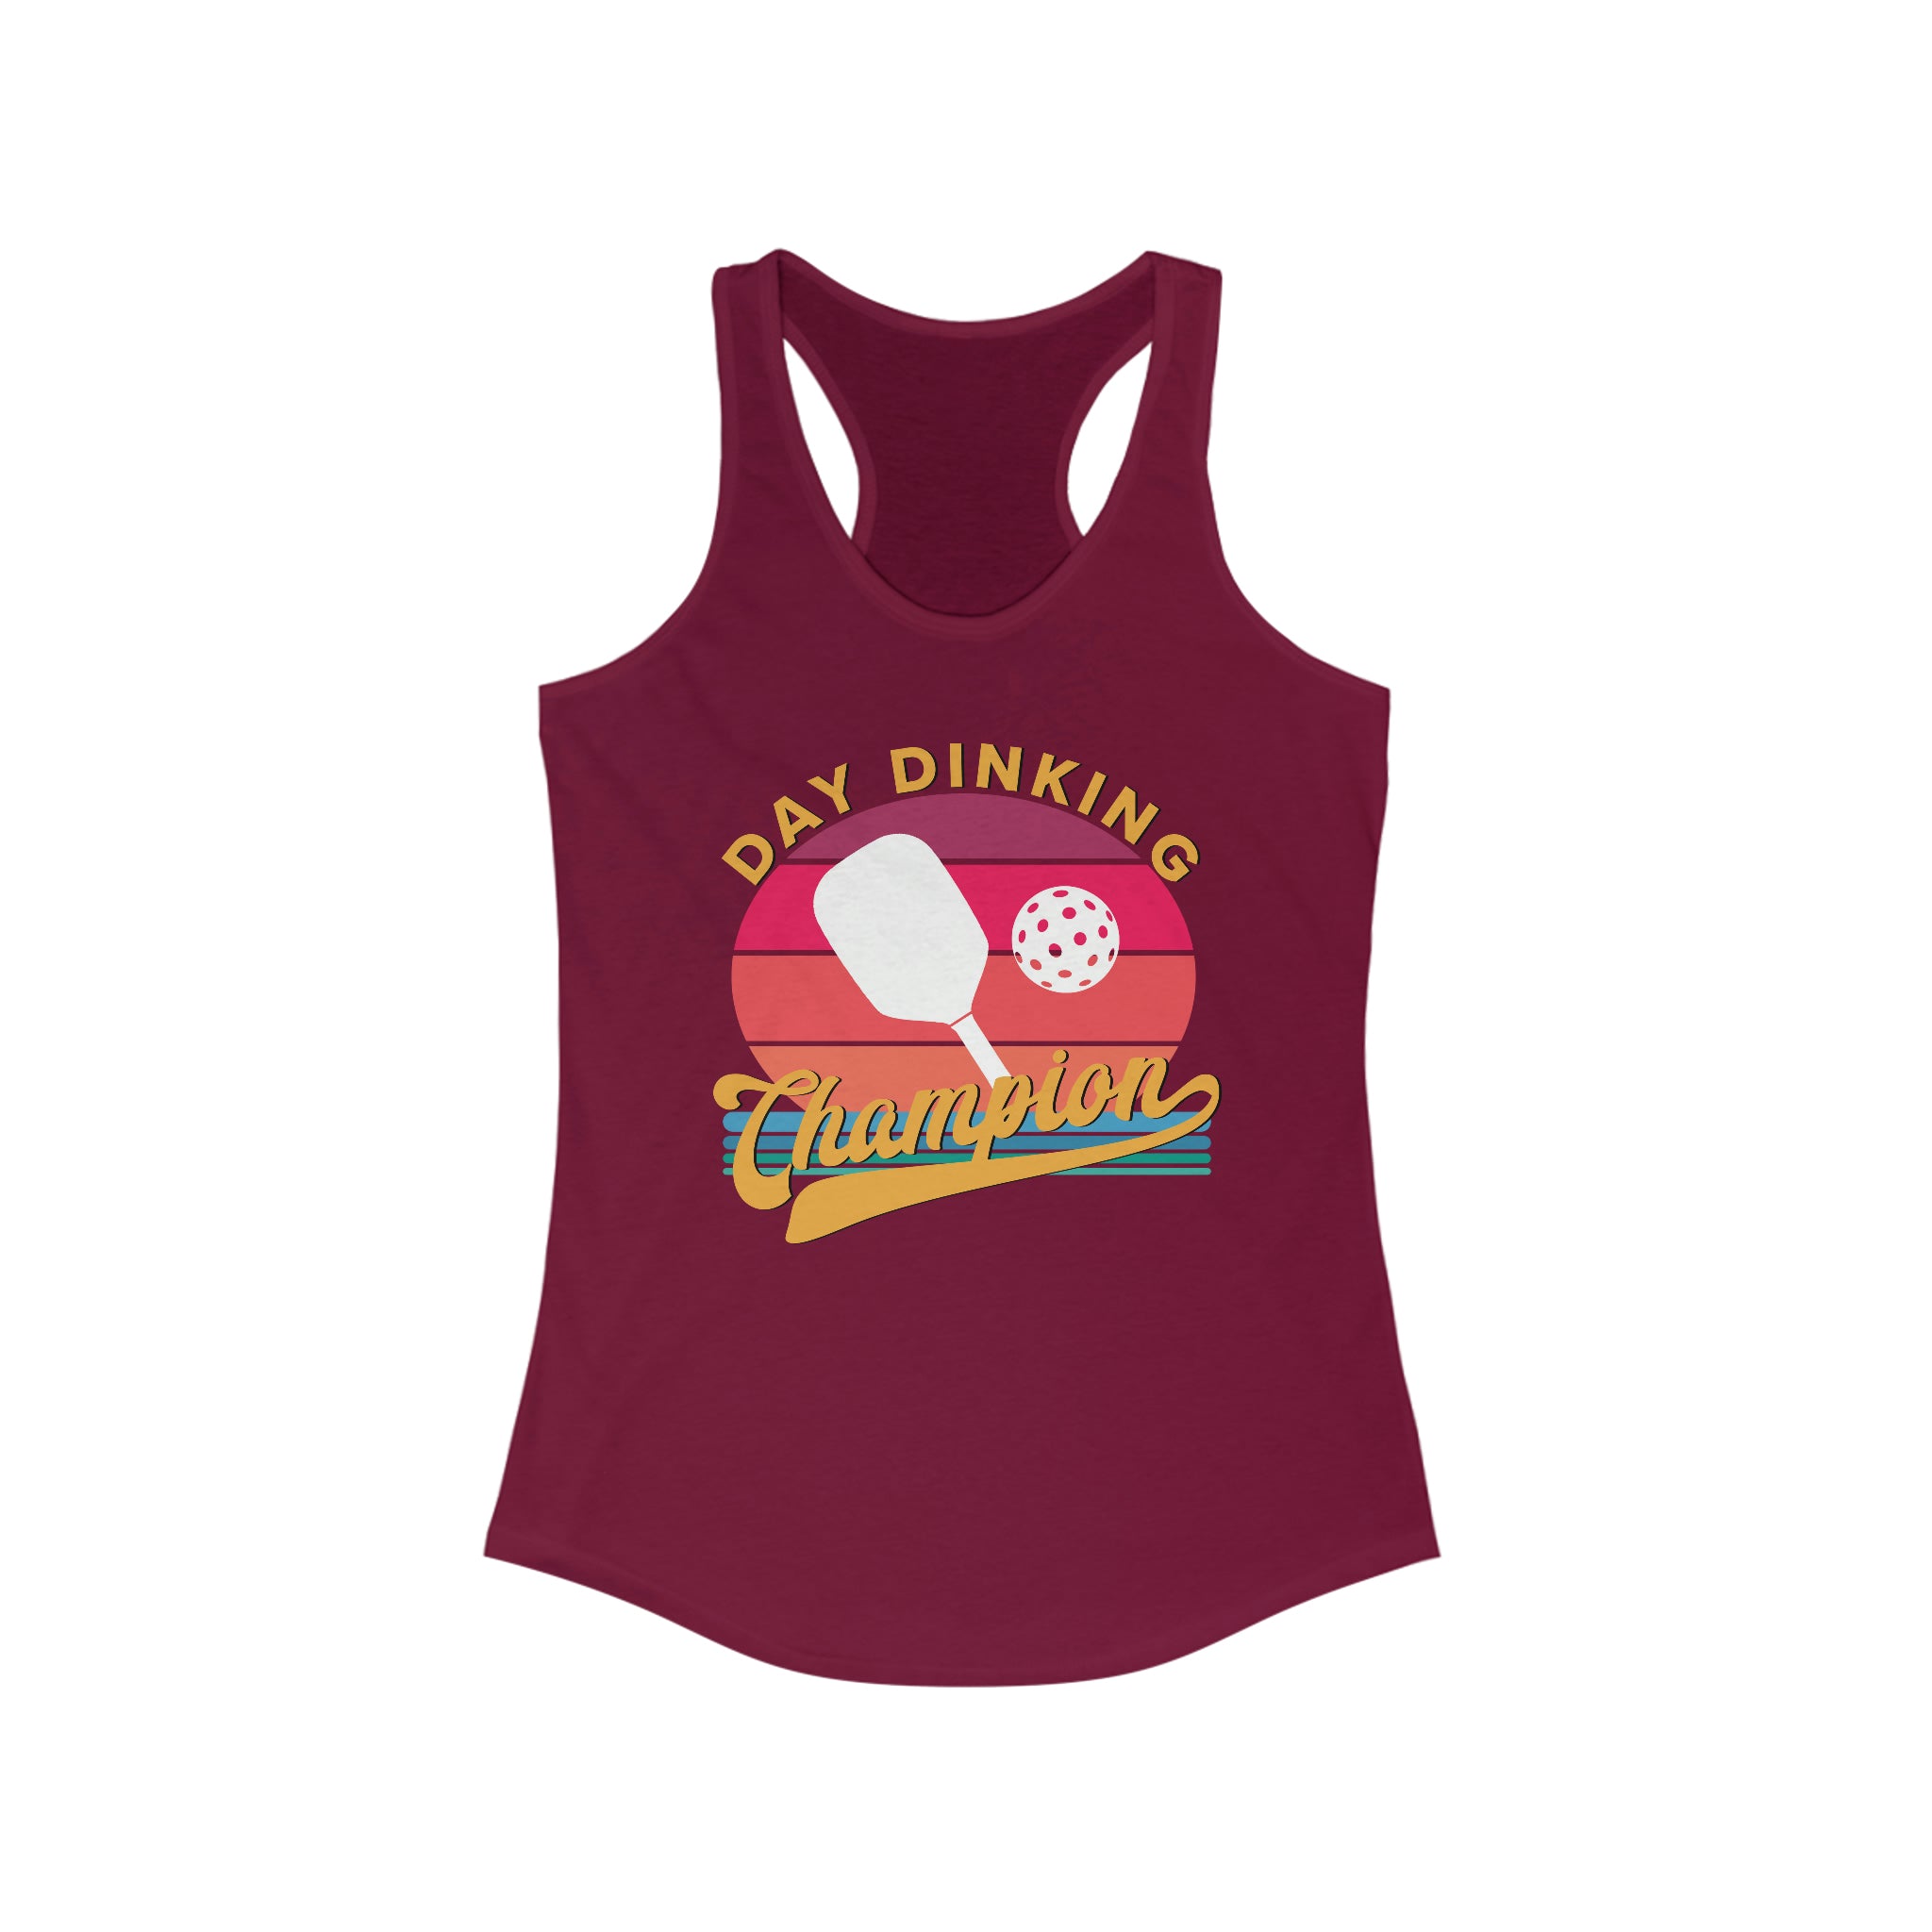 maroon burgundy day dinking champion retro inspired pickleball apparel women's racerback tank top front view